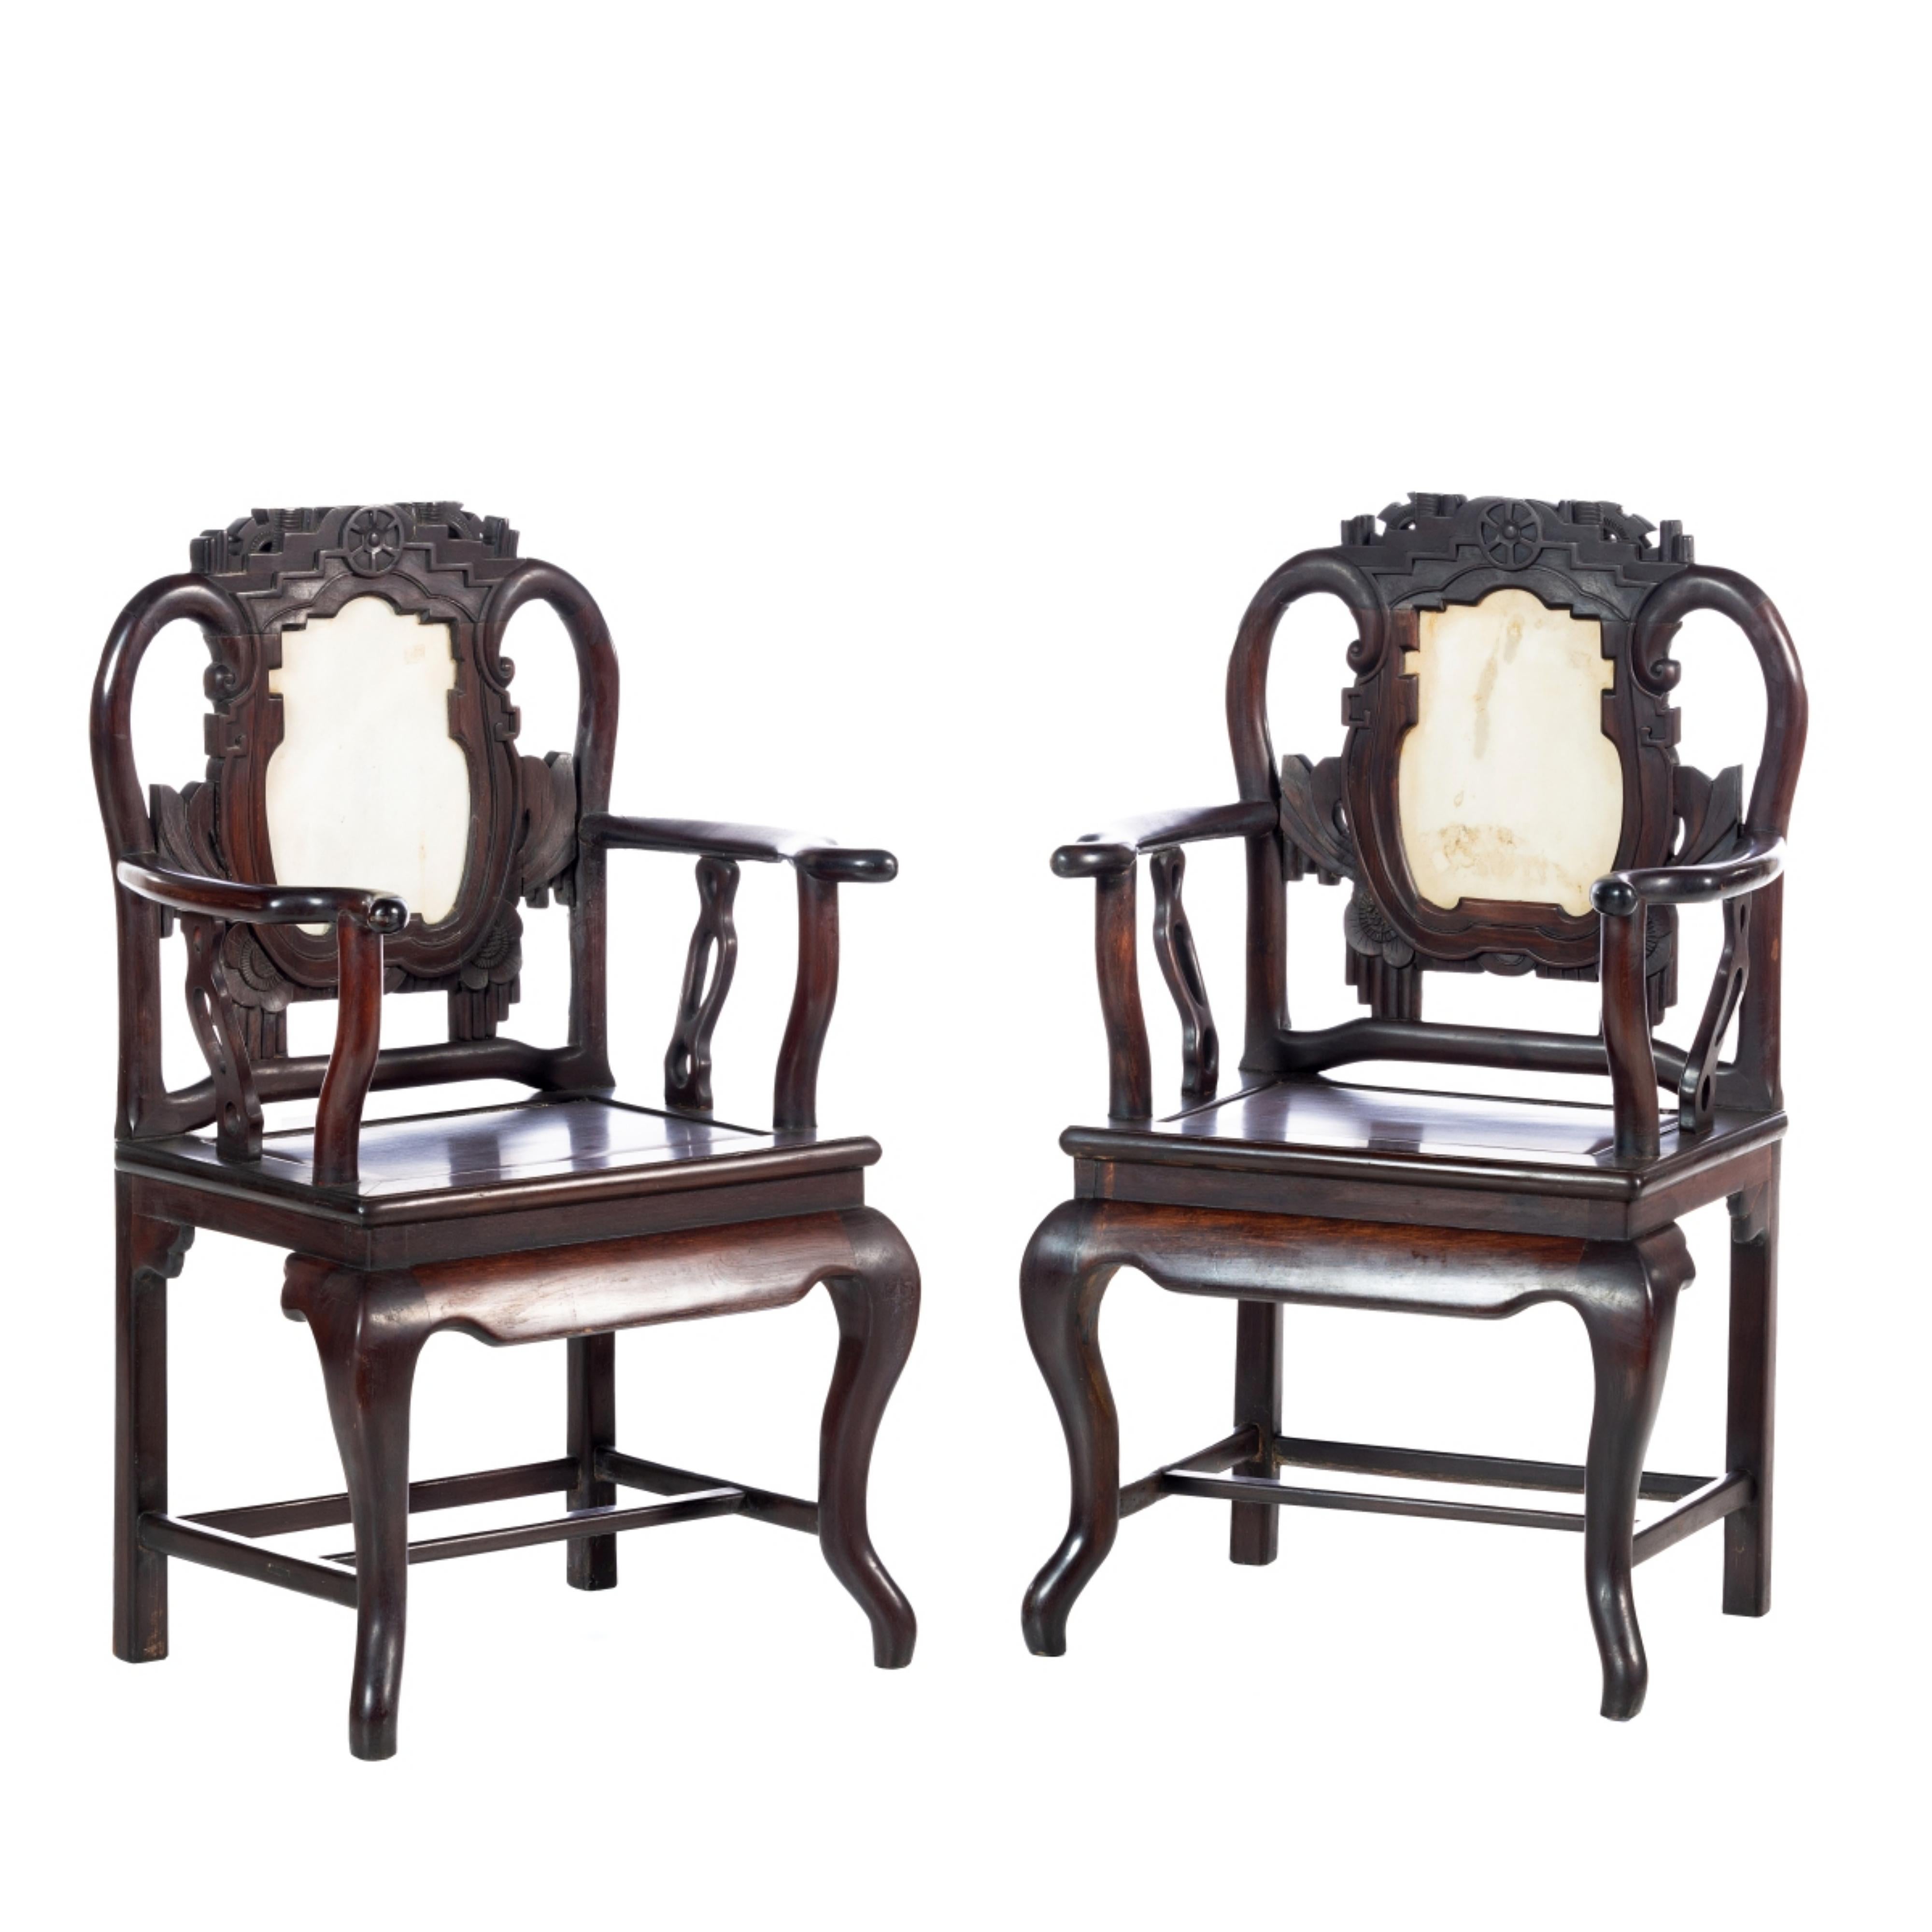 Four (4) ARMCHAIRS

Chinese, 19th Century,
in hardwood and marble.
Dim.: 96 x 59 x 44 cm
good conditions